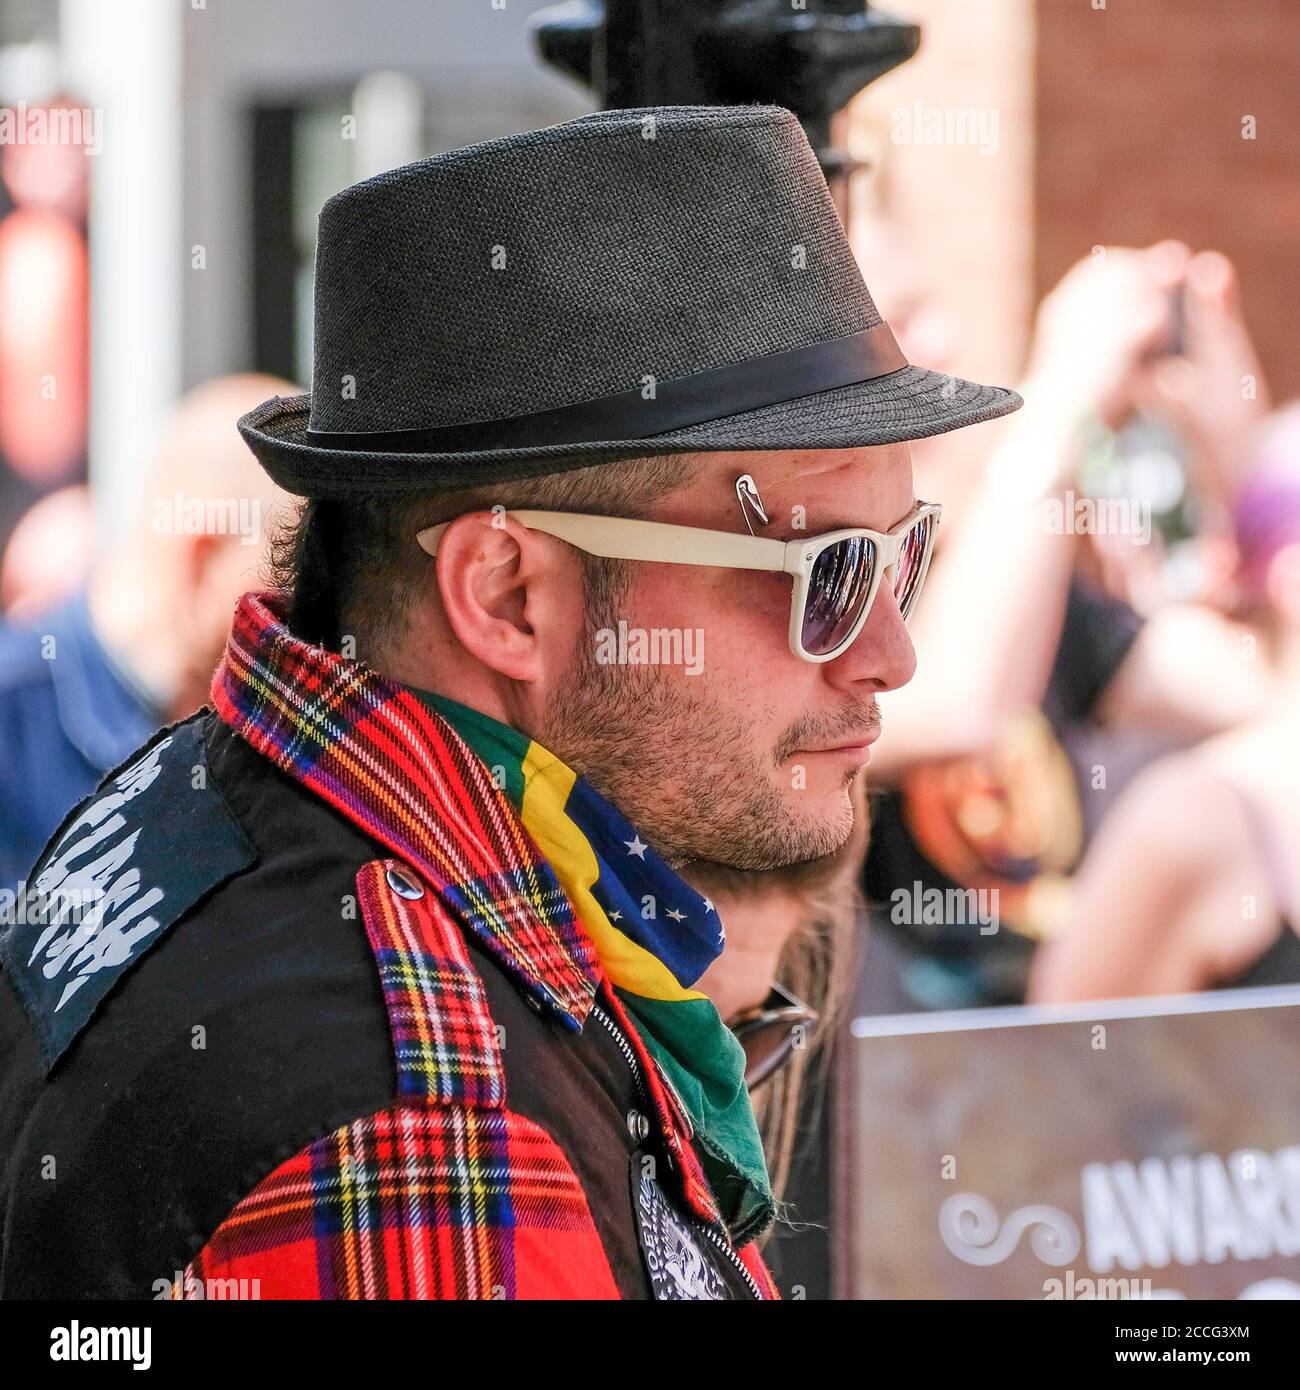 punk male with trilby, check shirt and safety-pin face piercing Stock Photo